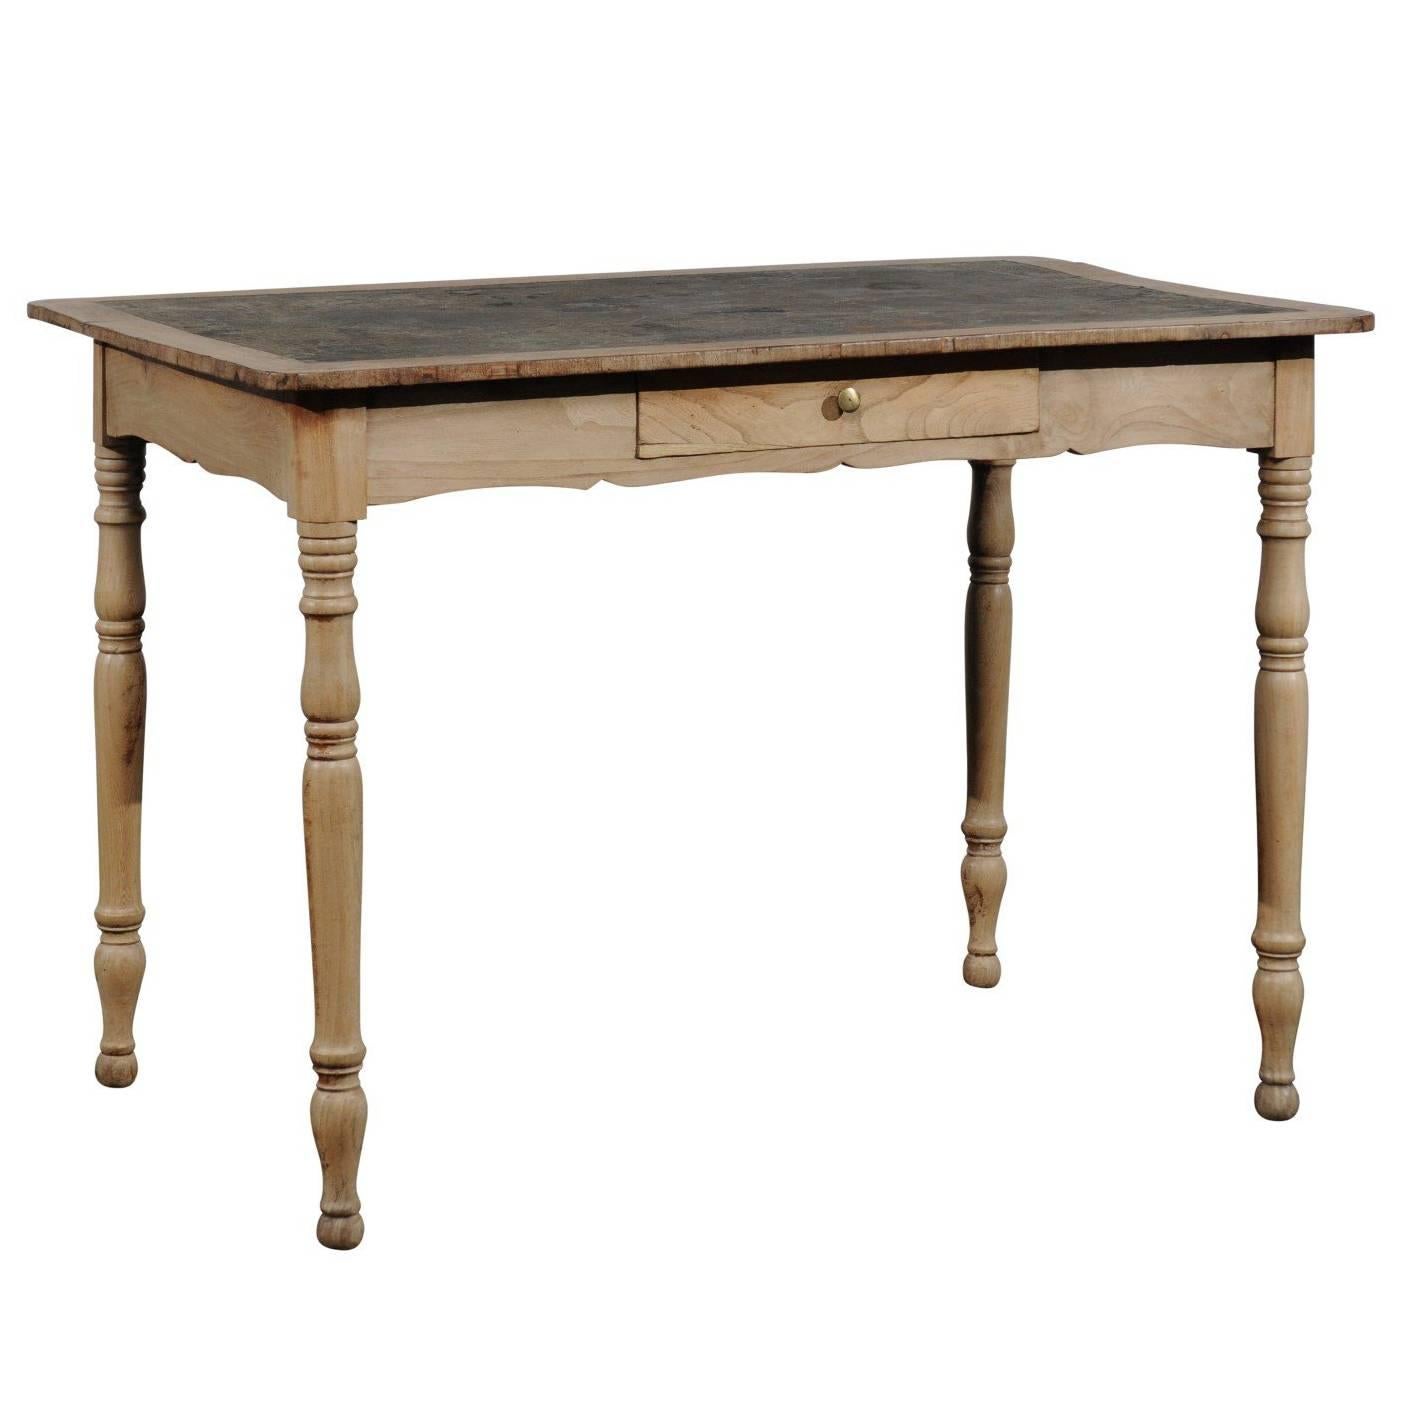 19th Century English Bleached Pine Writing Table with Leather Top